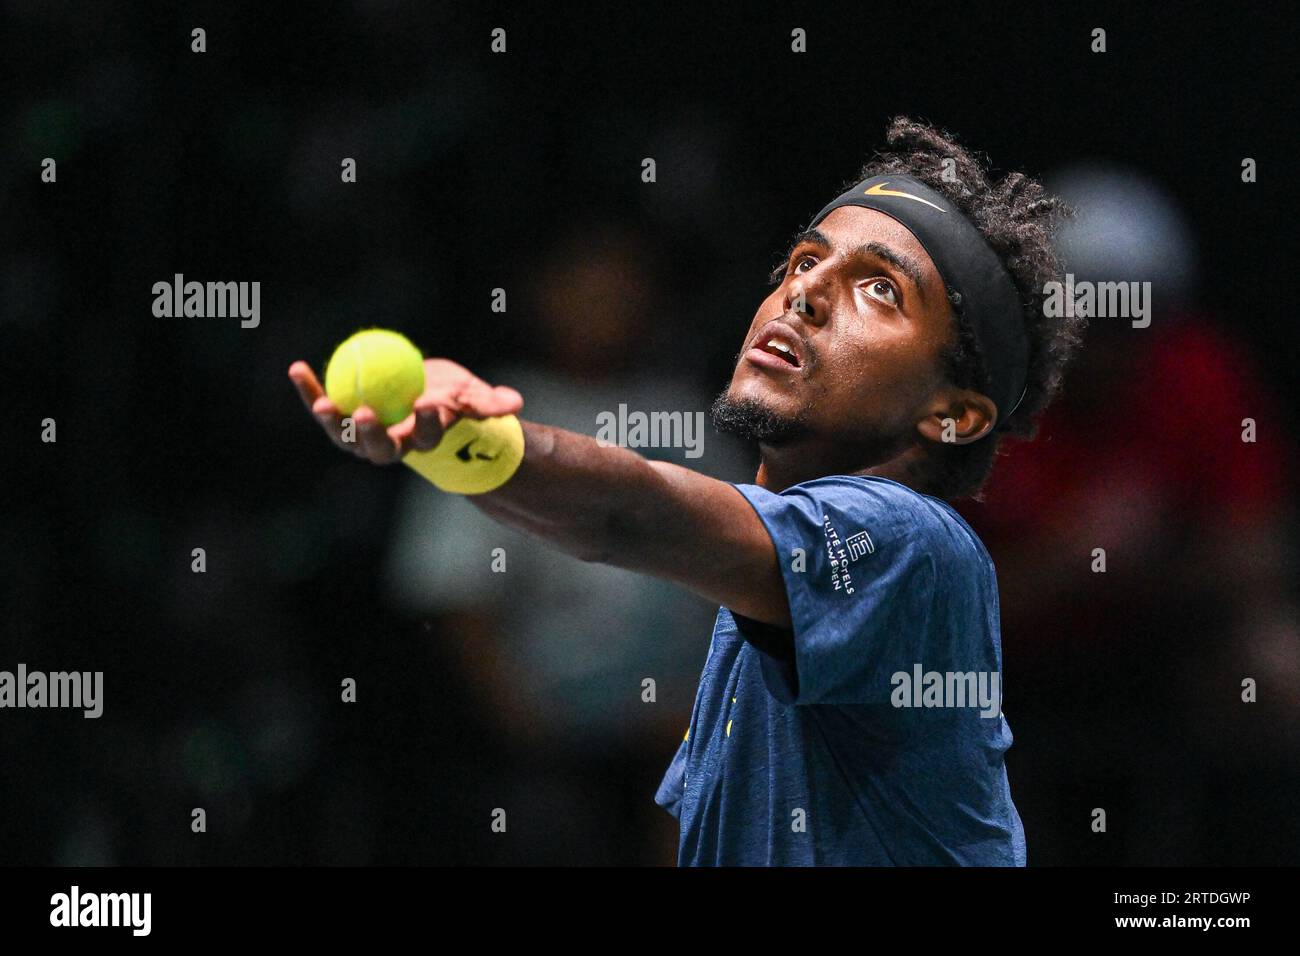 Bologna, Elias Ymer (Sweden) during the Davis Cup finals between Sweden and Chile at Unipol Arena